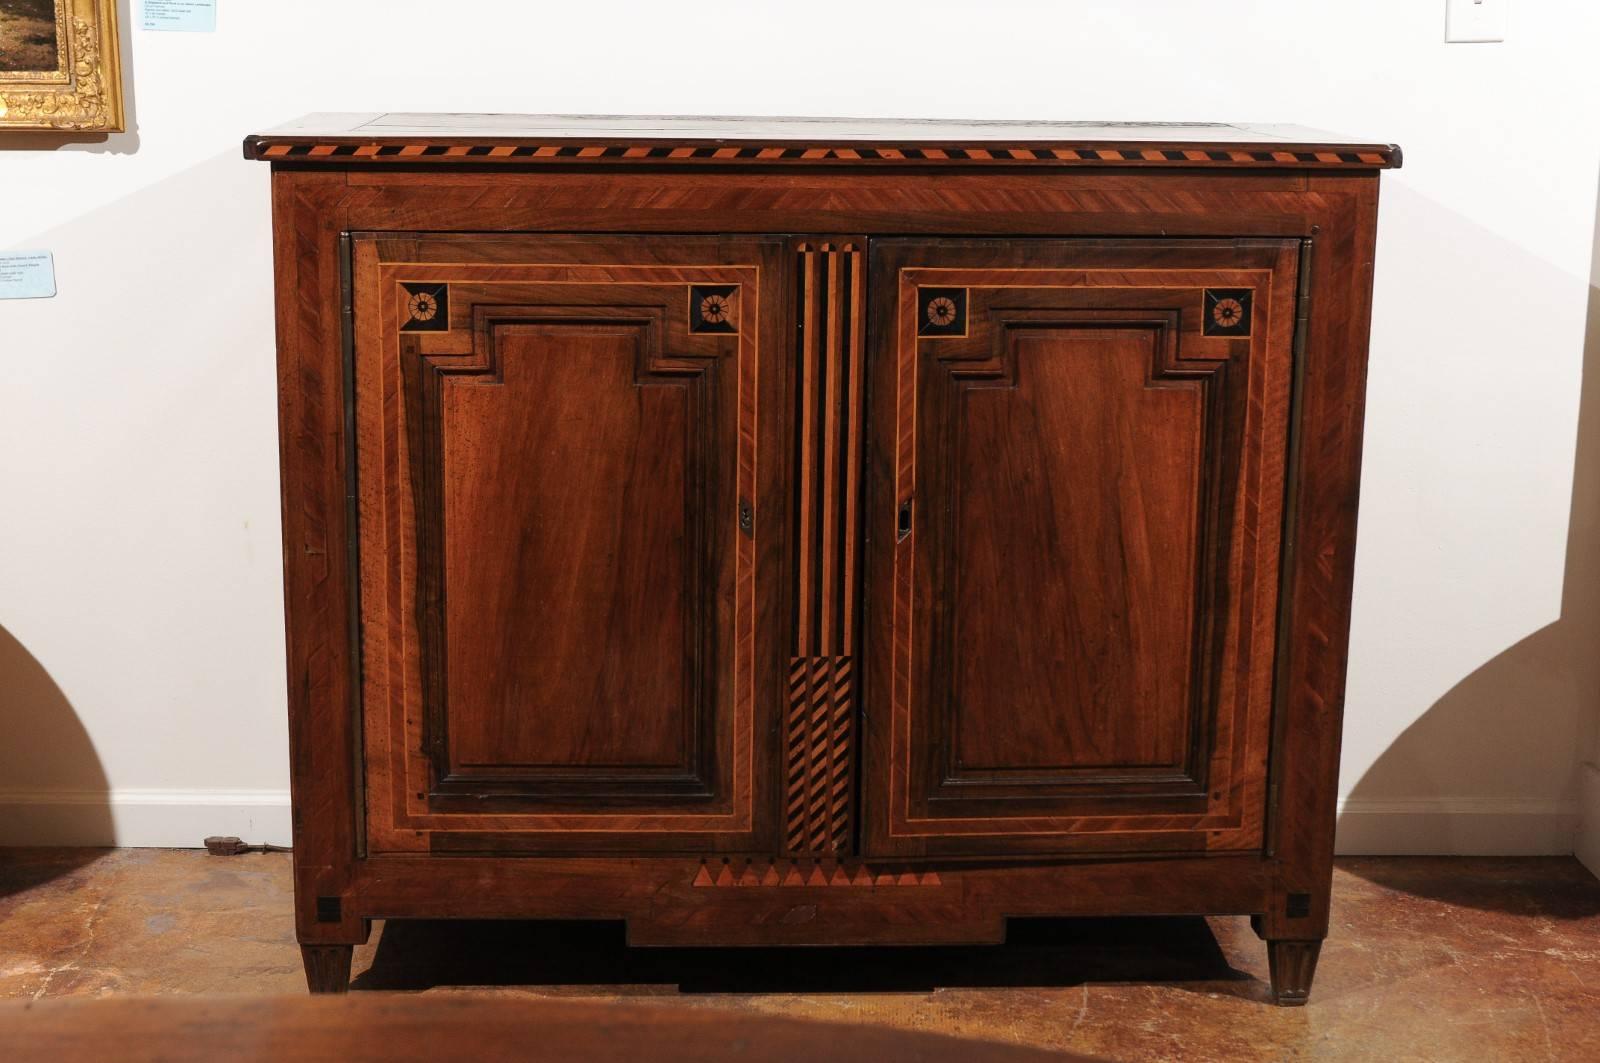 A French neoclassical style mahogany buffet from the mid-19th century, with marquetry inlay. This exquisite French two-door buffet features a rectangular top showing beautiful signs of aging, adorned in the front with a delicate two-toned inlay and